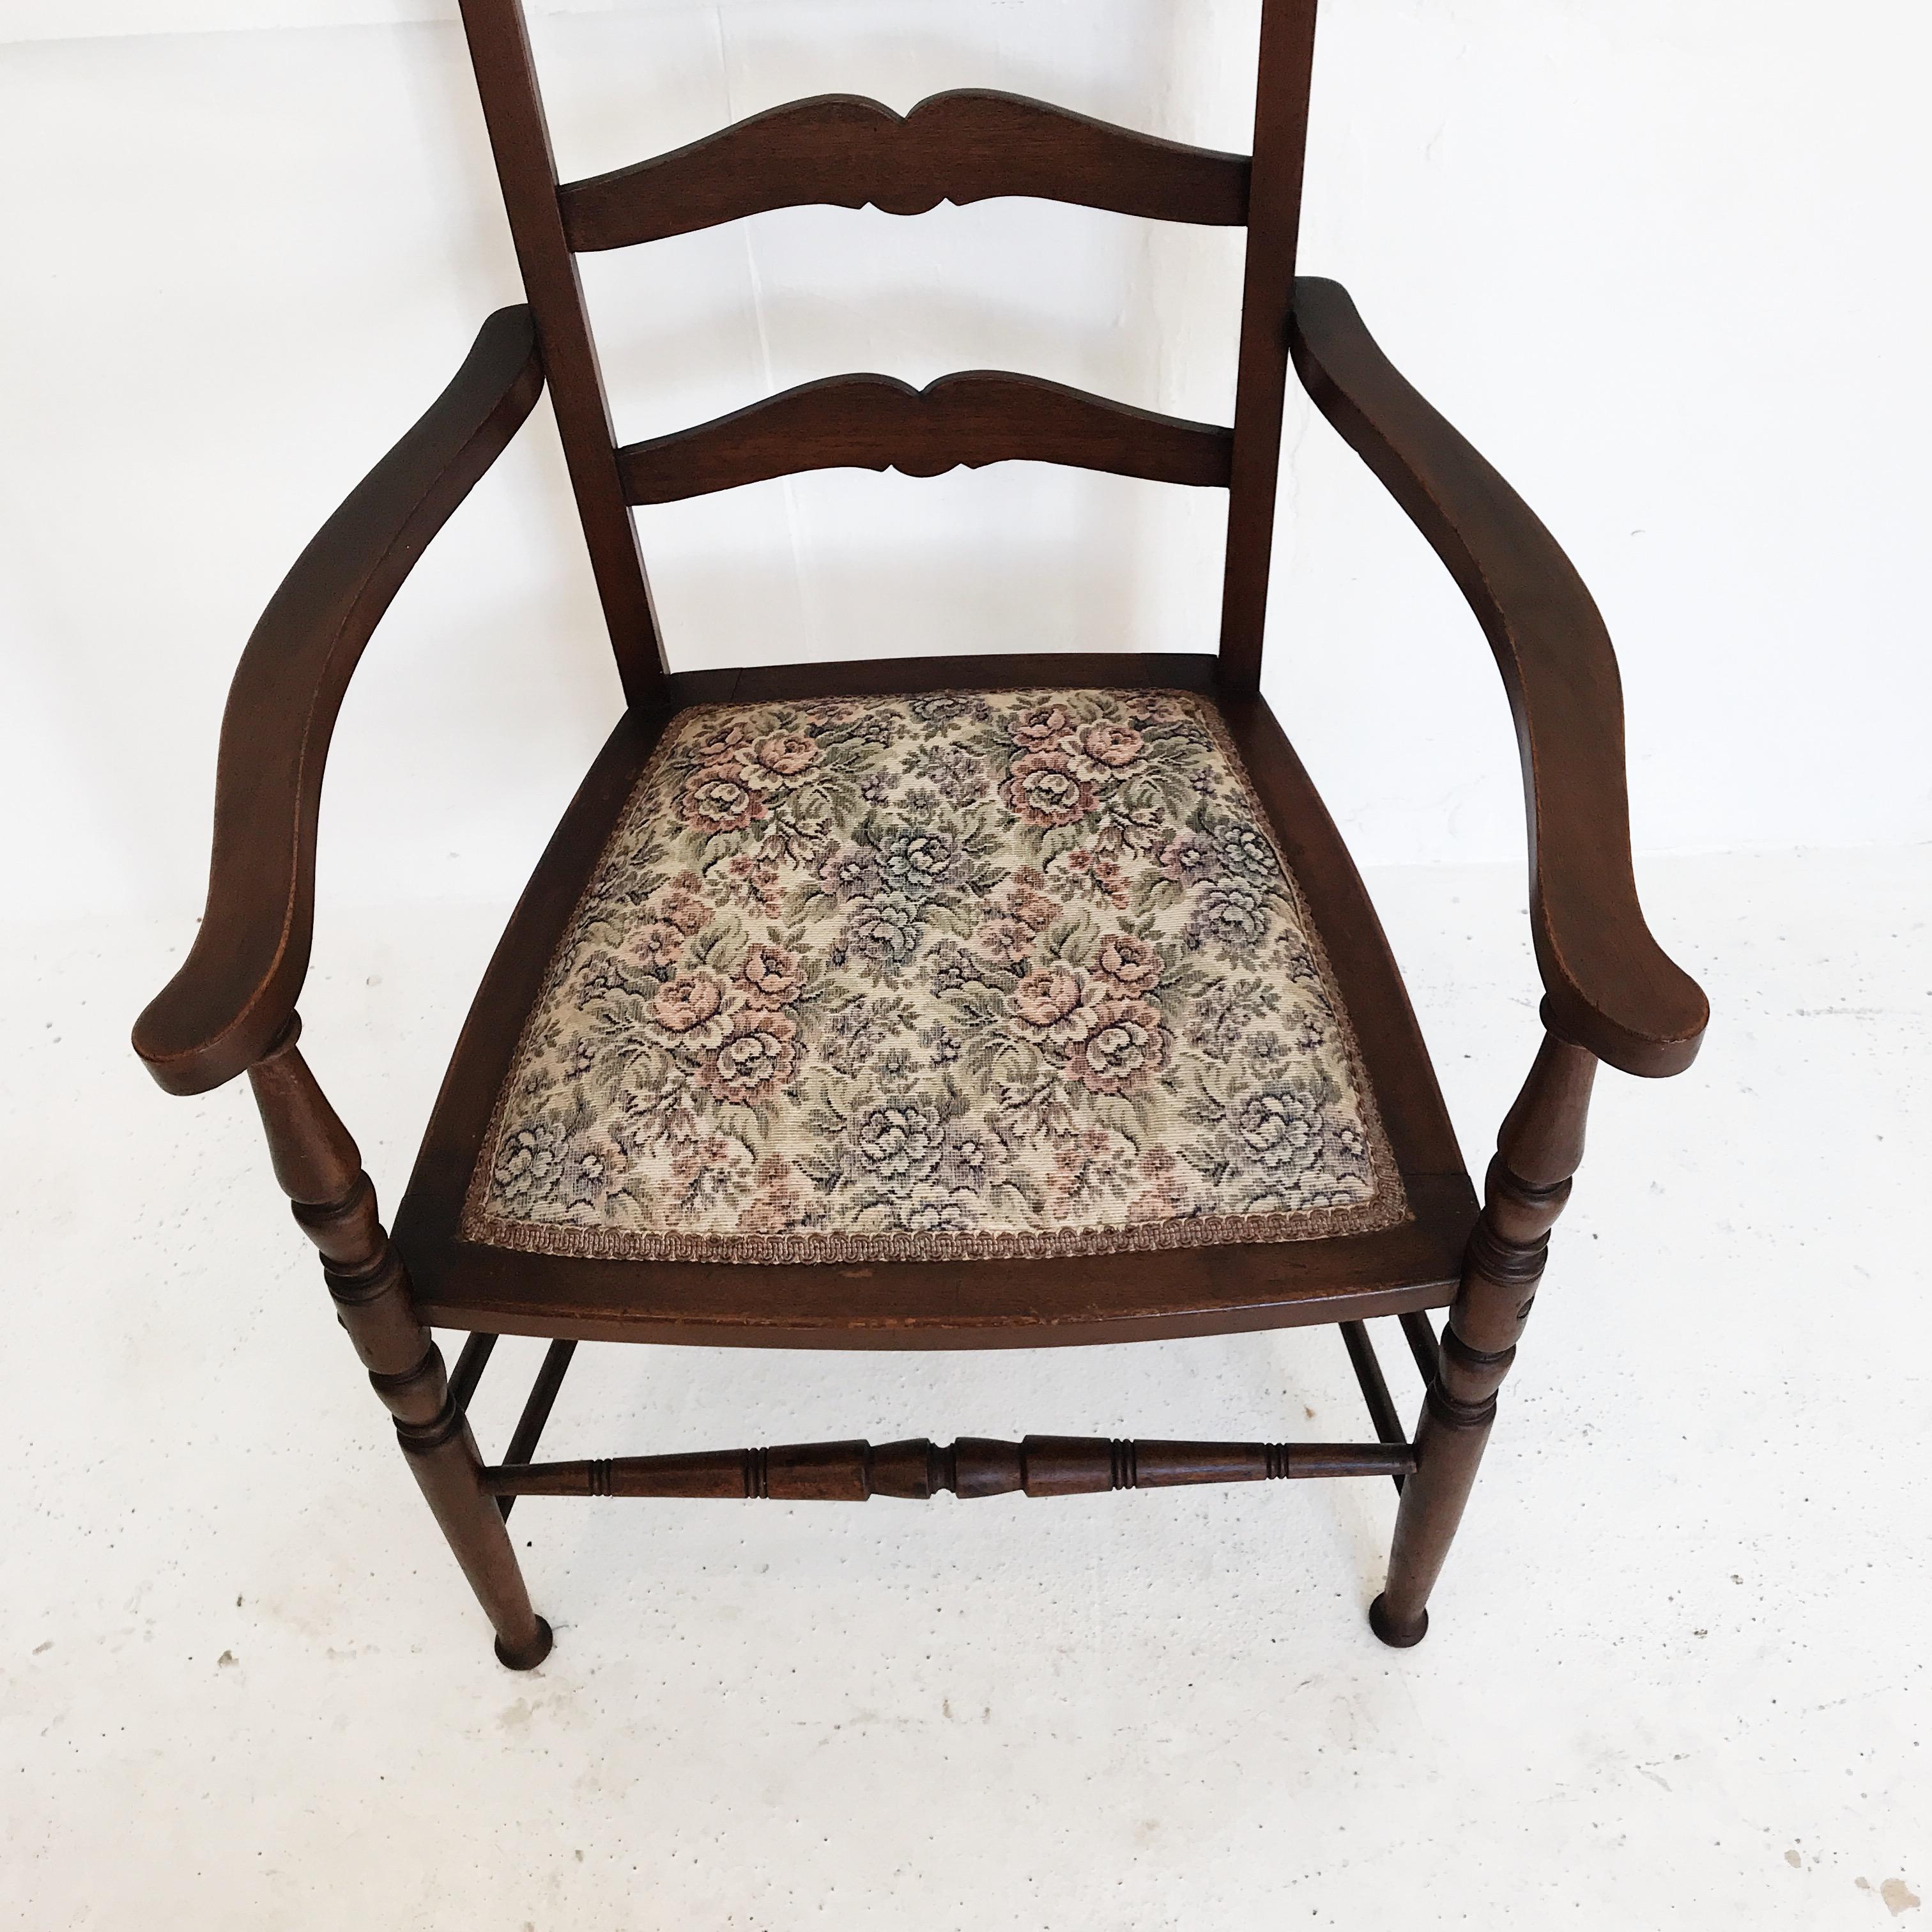 Arts and Crafts Early-20th Century Ladder Back Chair by Beard Watson Limited, Sydney, Australia For Sale